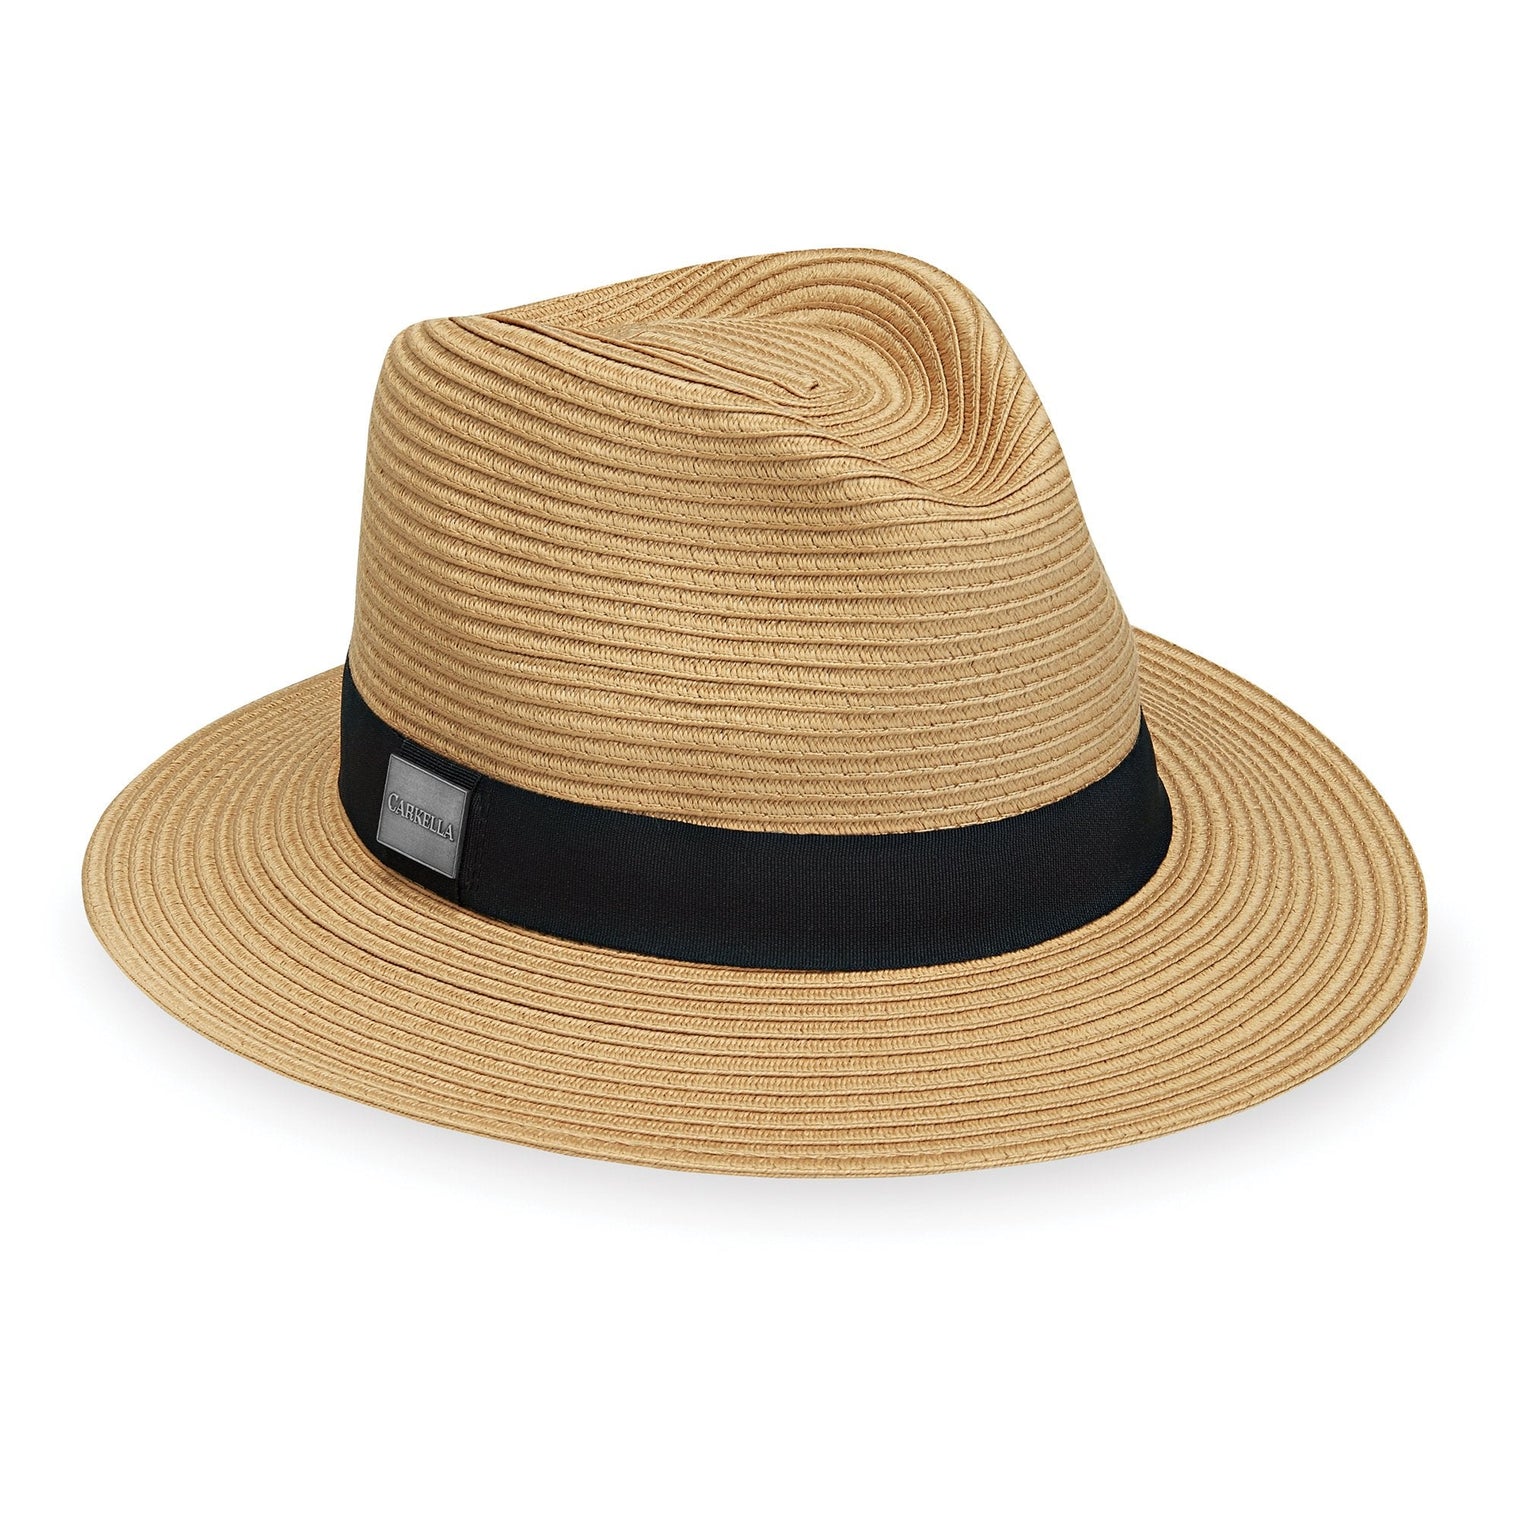 Featuring Front of Unisex Packable Fedora Style Palm Beach UPF Sun Golf Hat from Carkella